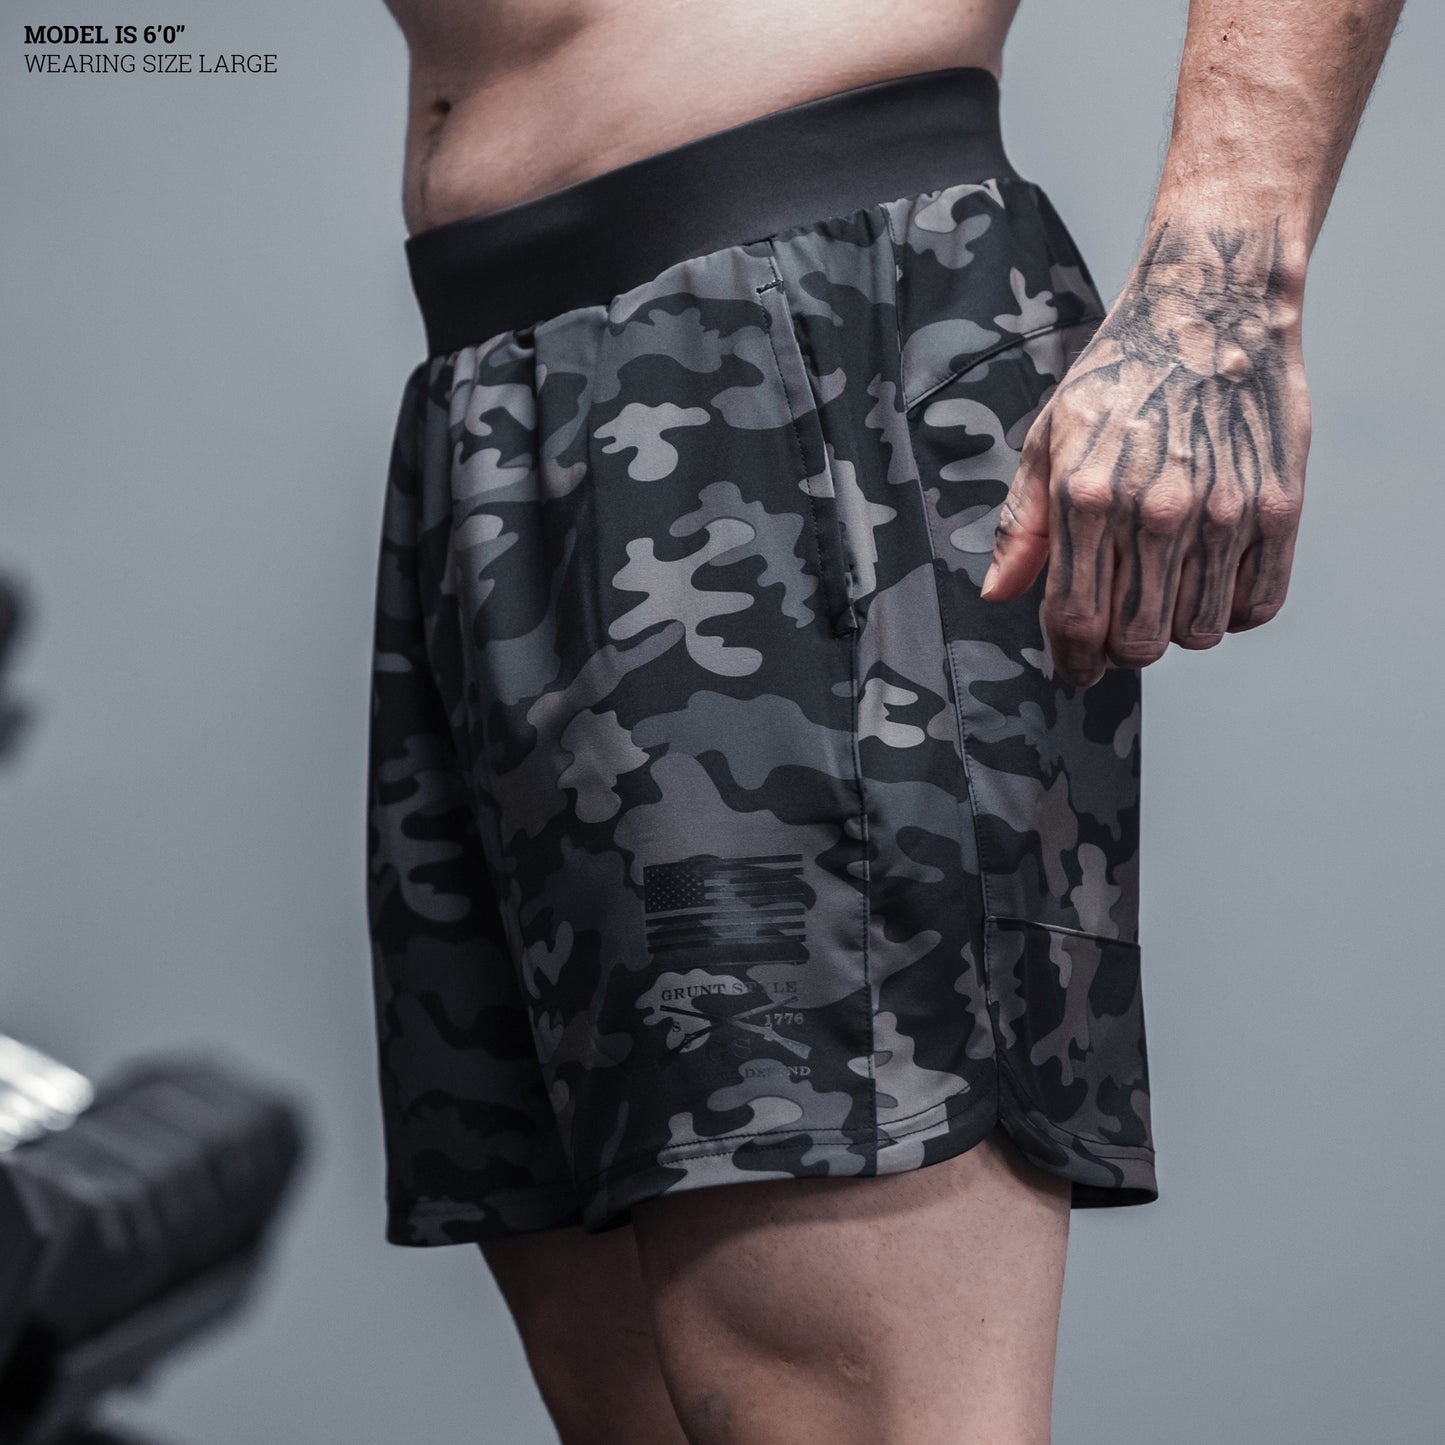  Training Shorts for Men in Black Camo | Grunt Style 